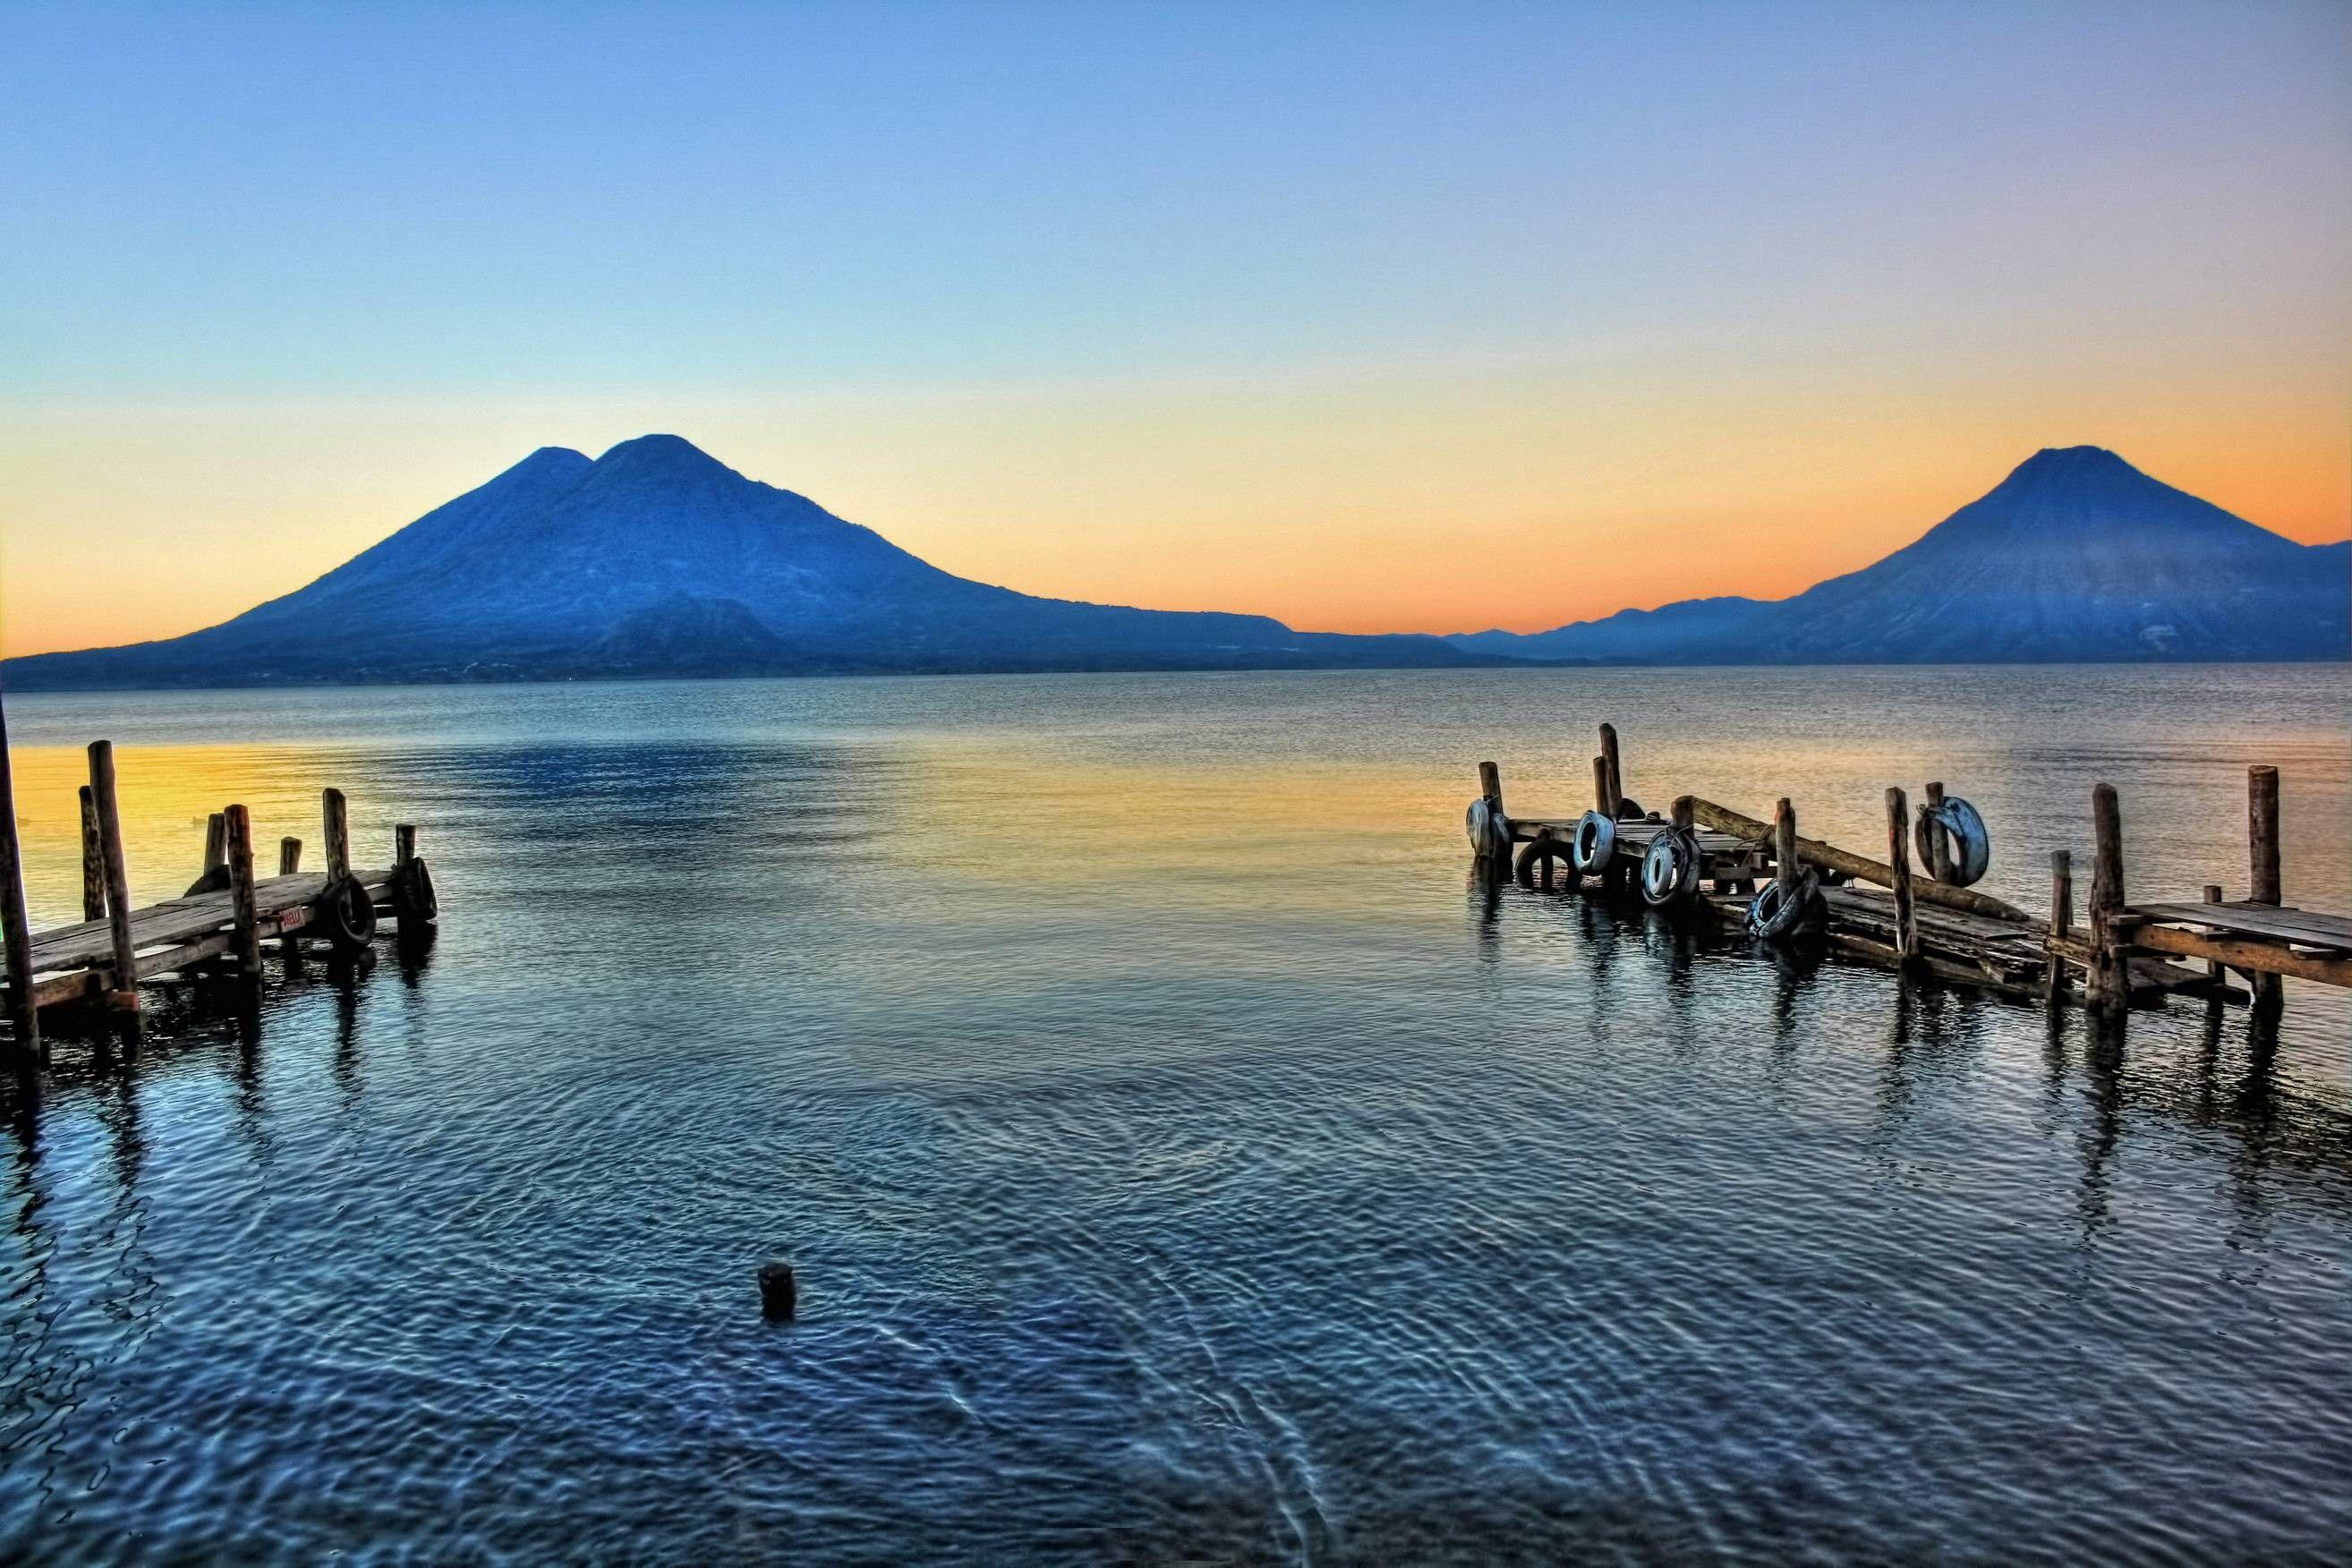 1K Guatemala Pictures  Download Free Images on Unsplash